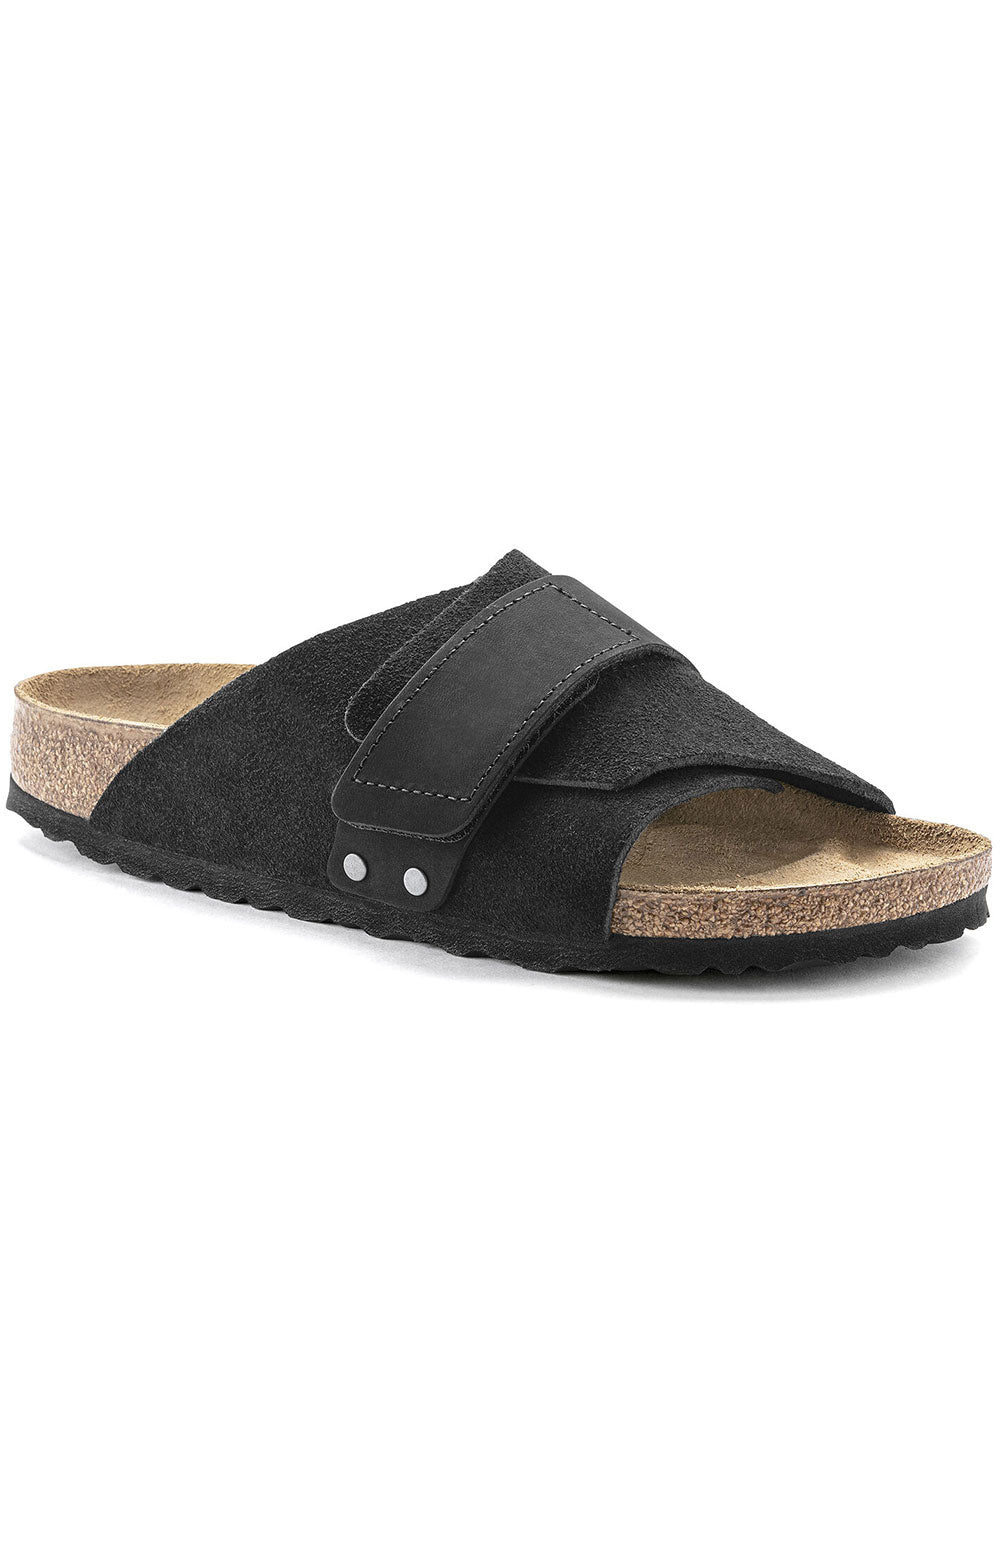 Kyoto Sandals Black made with genuine leather and adjustable ankle strap